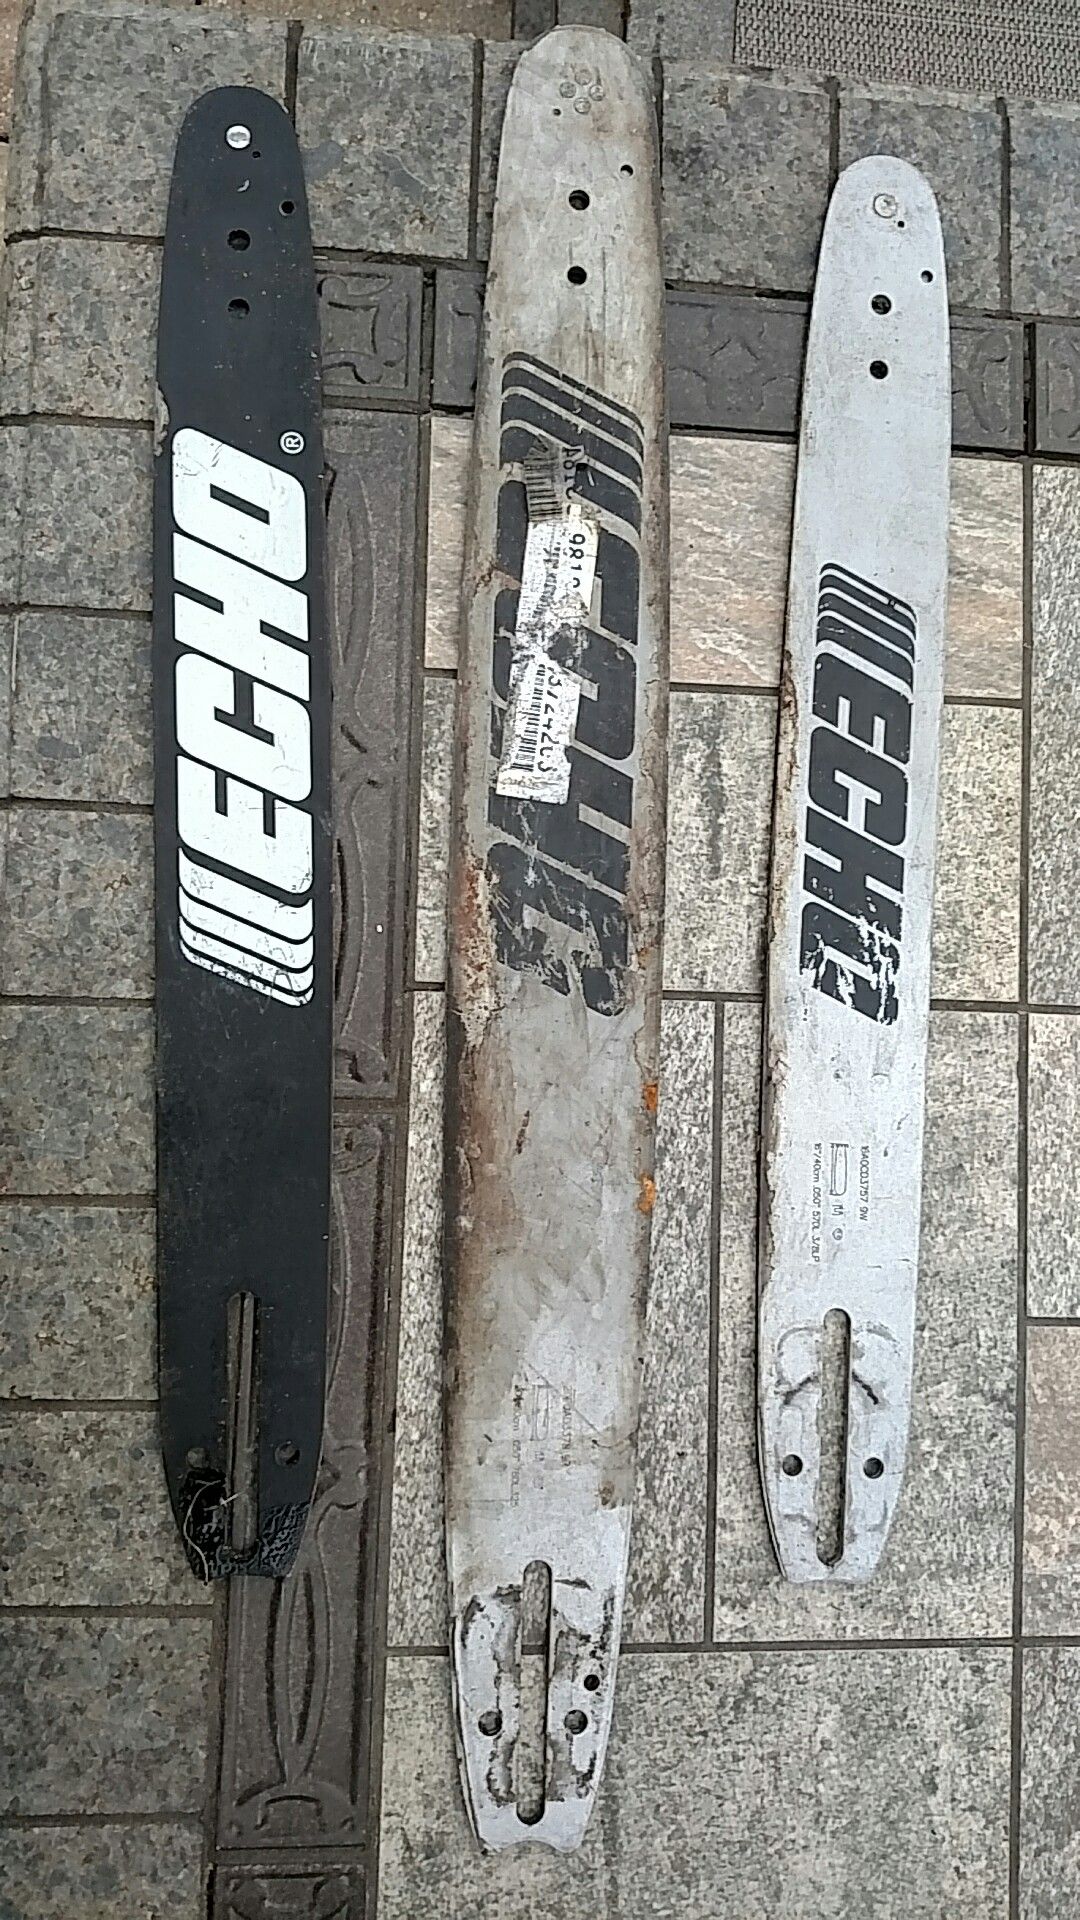 3ho chainsaw blades x16" and 1x20"